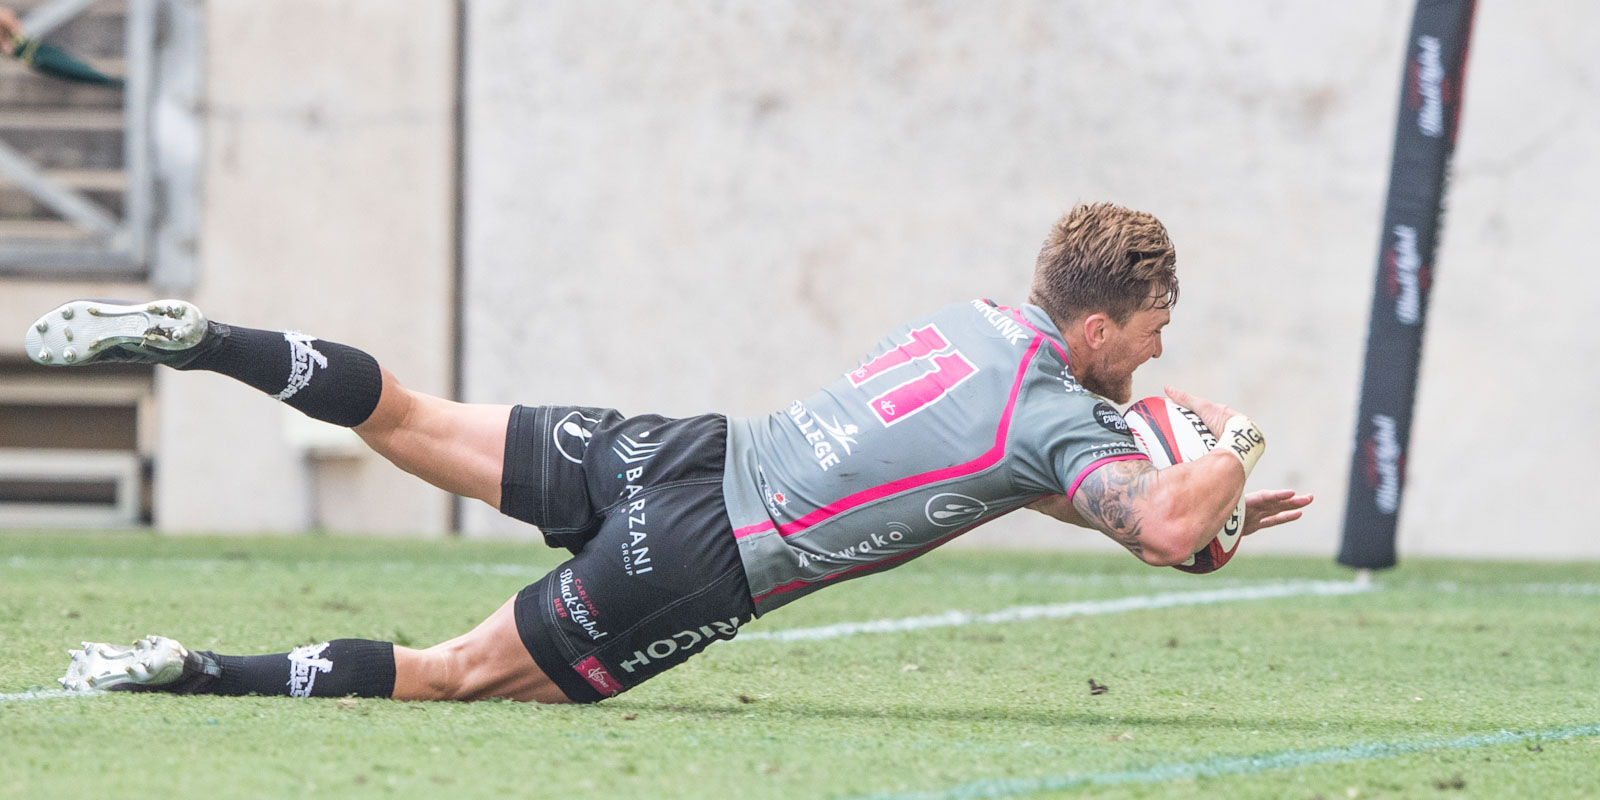 Etienne Taljaard goes over for his try.